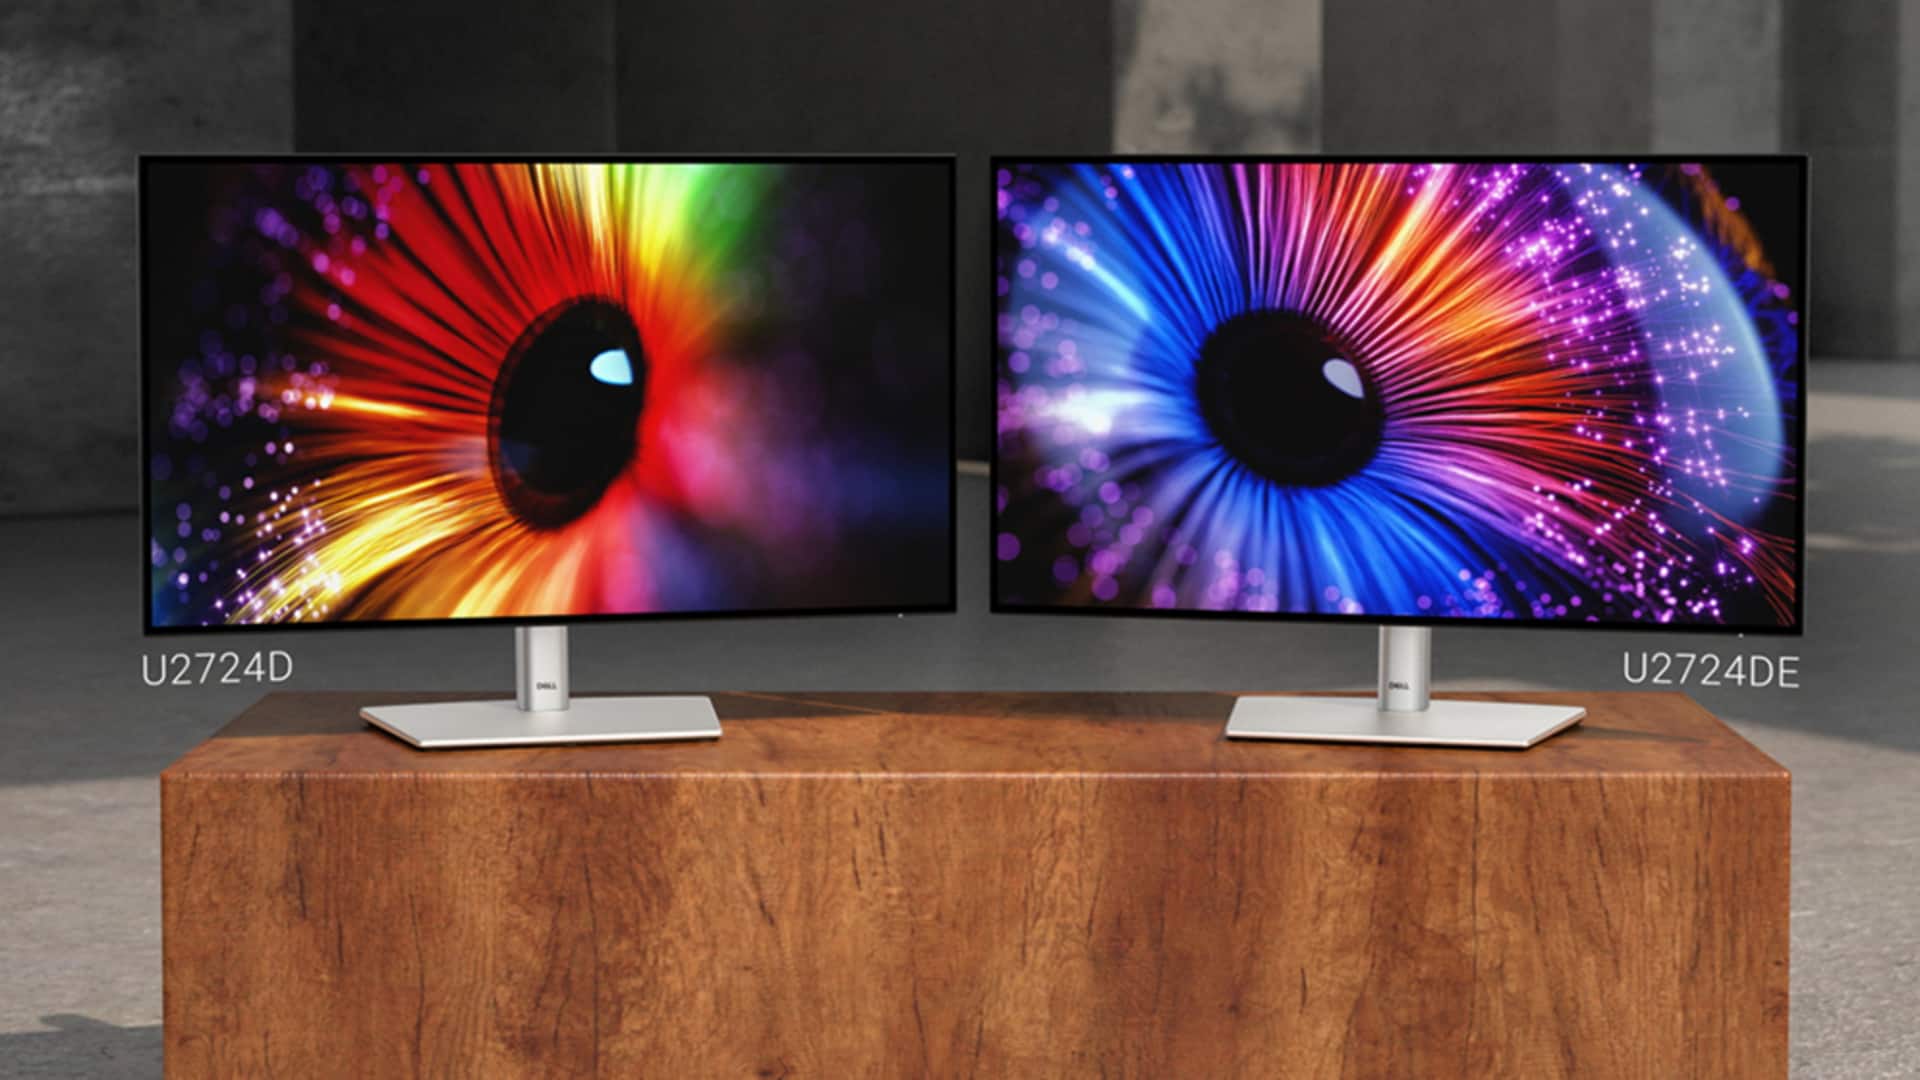 Dell's latest video conferencing monitors offer 120Hz displays